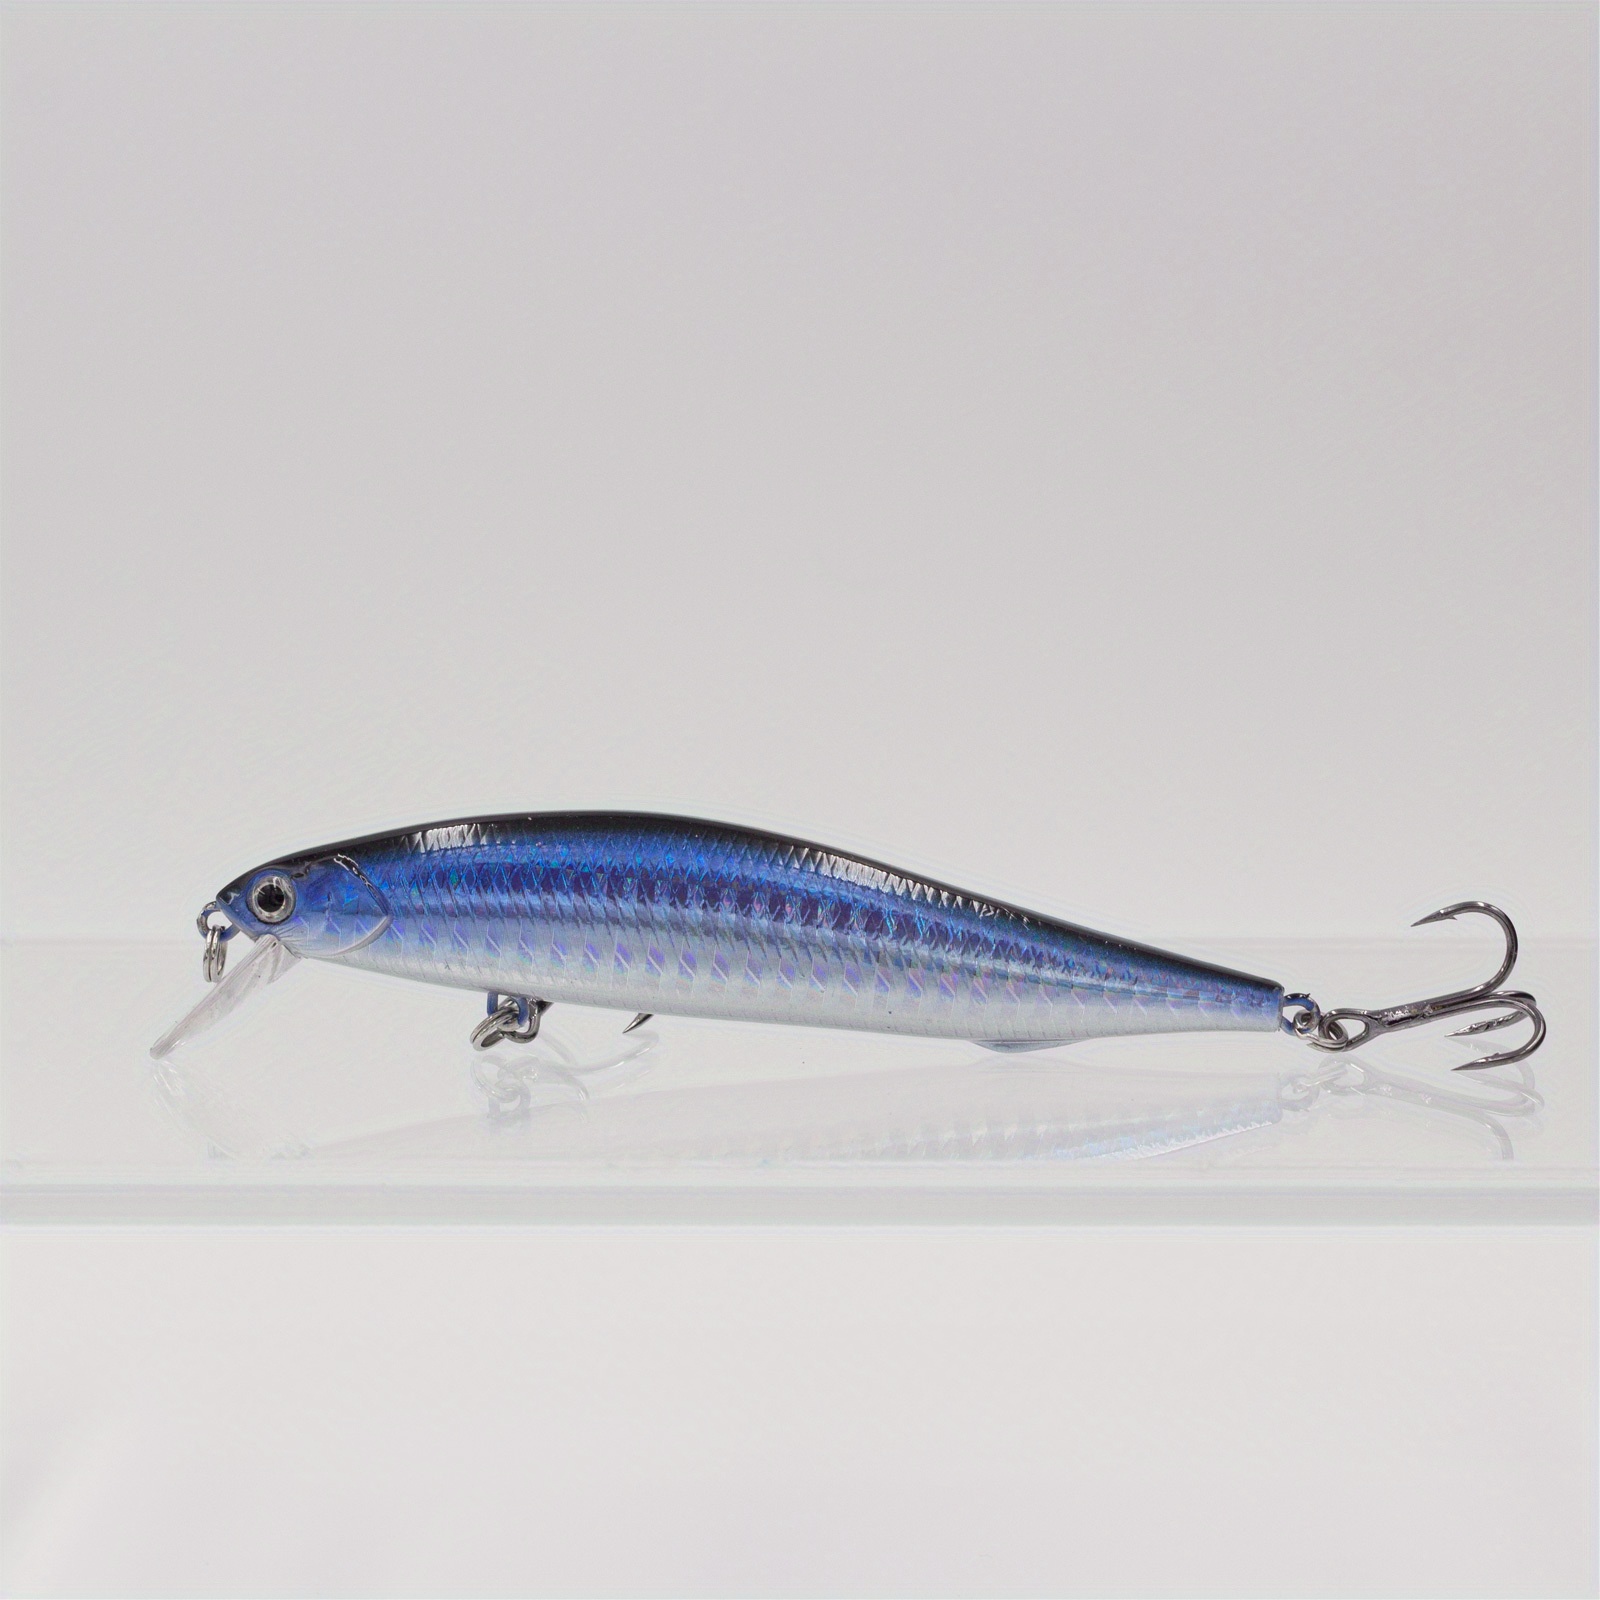 1pc Floating Minnow Lures Fishing Saltwater Trout Bass Fishing